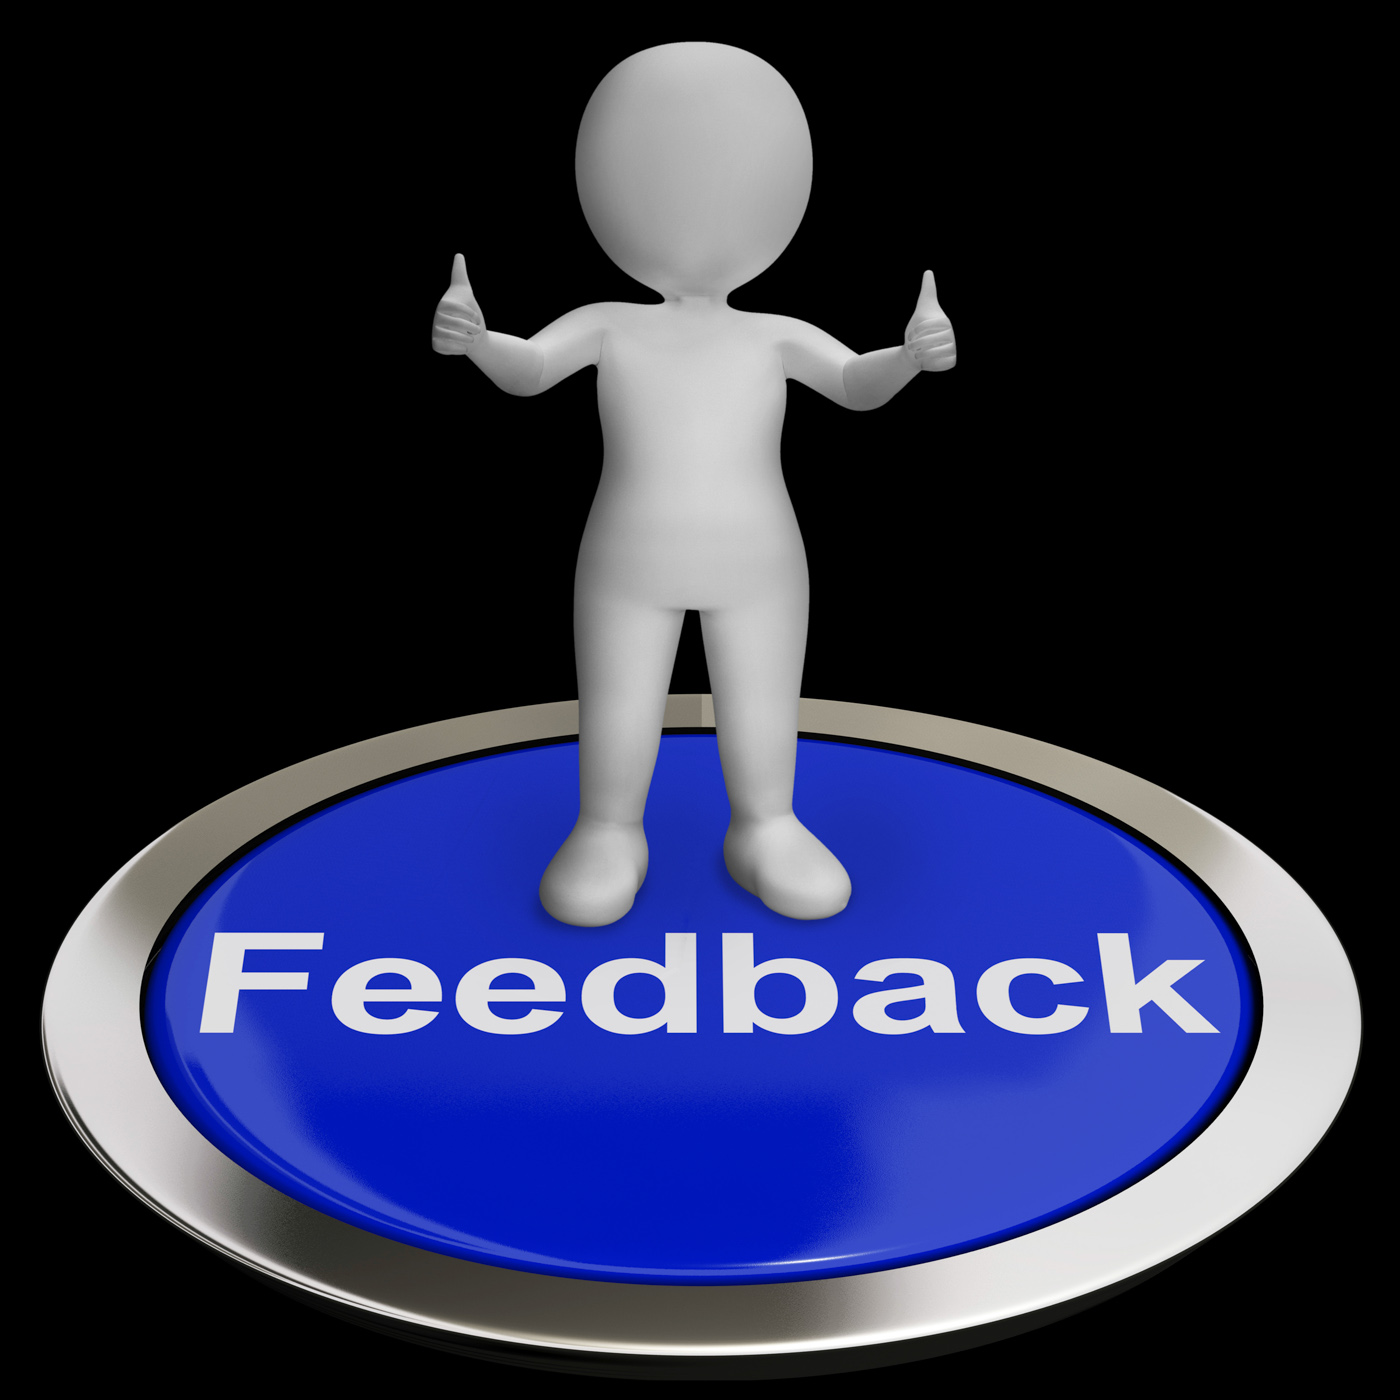 Feedback button shows opinion evaluation and surveys photo